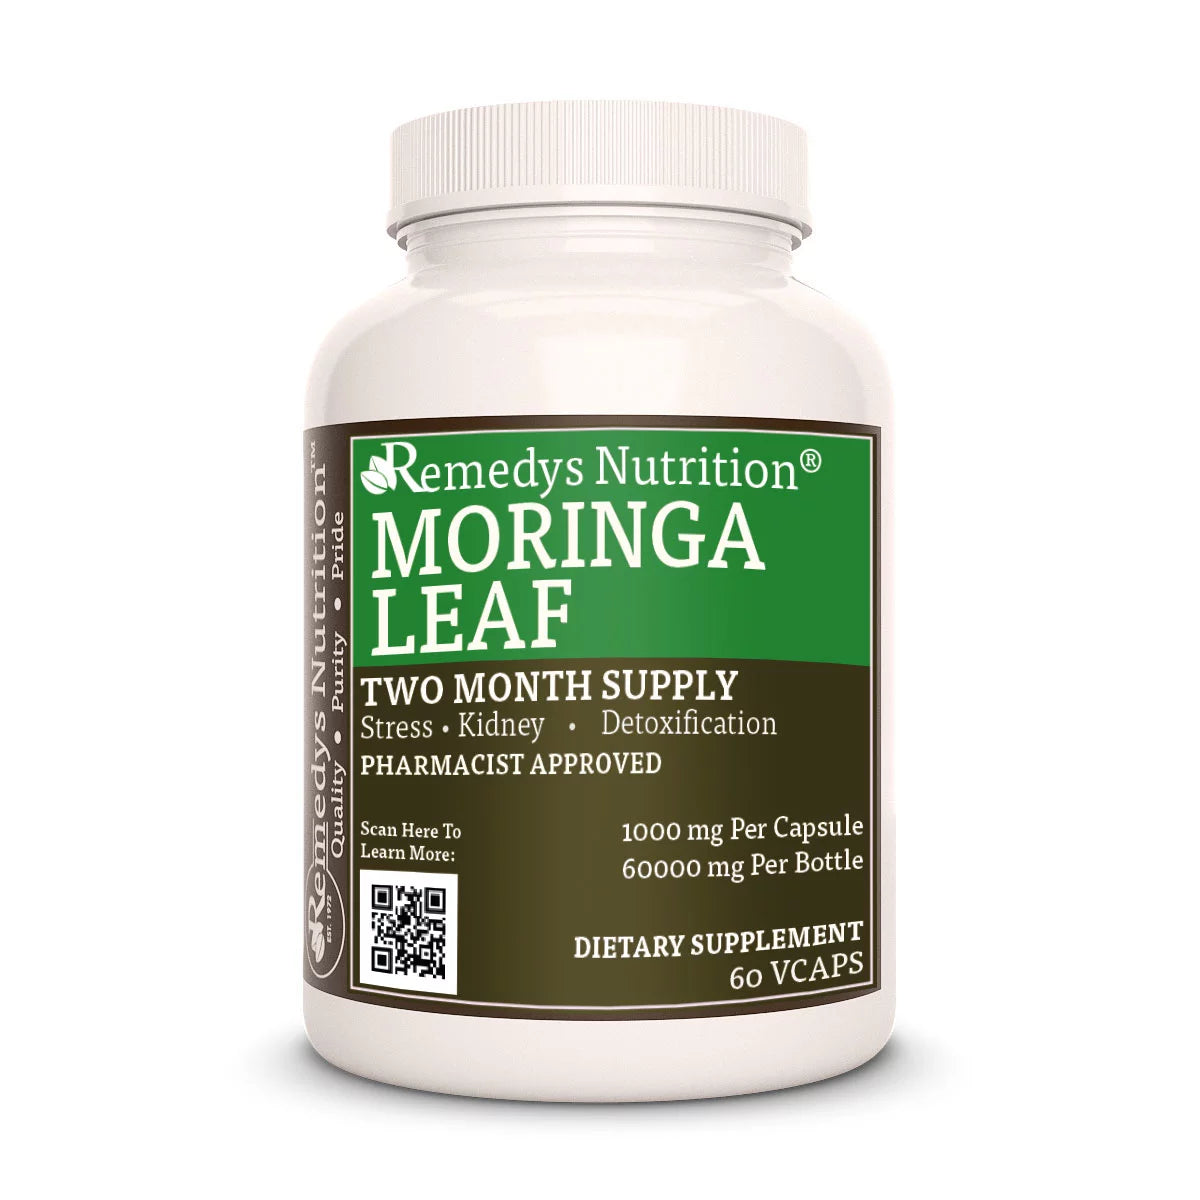 Image of Remedy's Nutrition® Moringa Leaf Capsules Herbal Dietary Supplement front bottle. Made in the USA. Moringa oleifera.